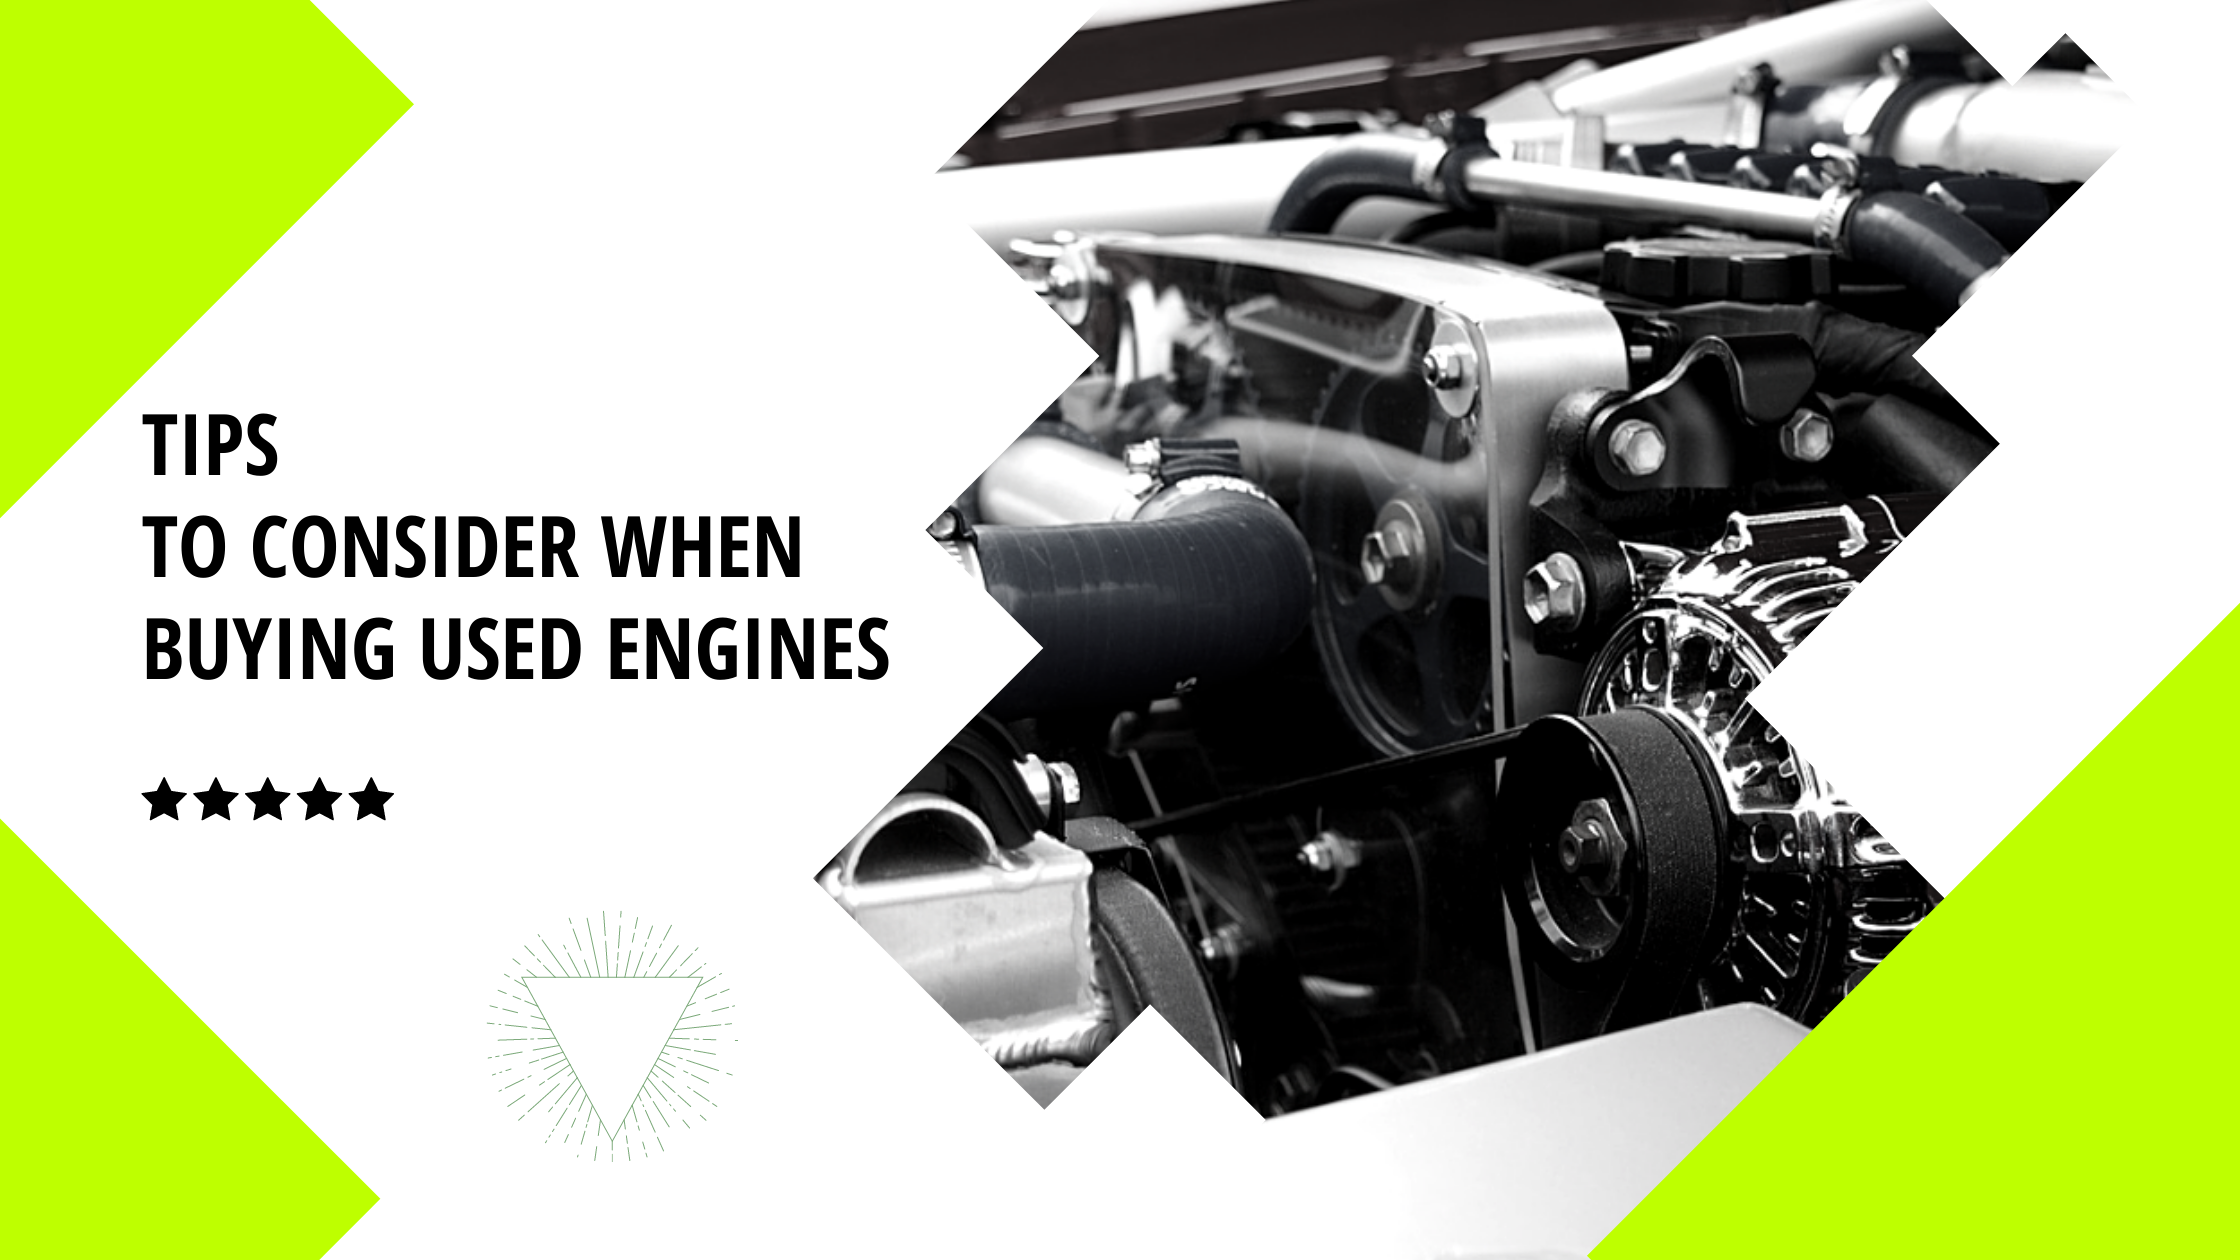 Tips to Consider when Buying Used Engines